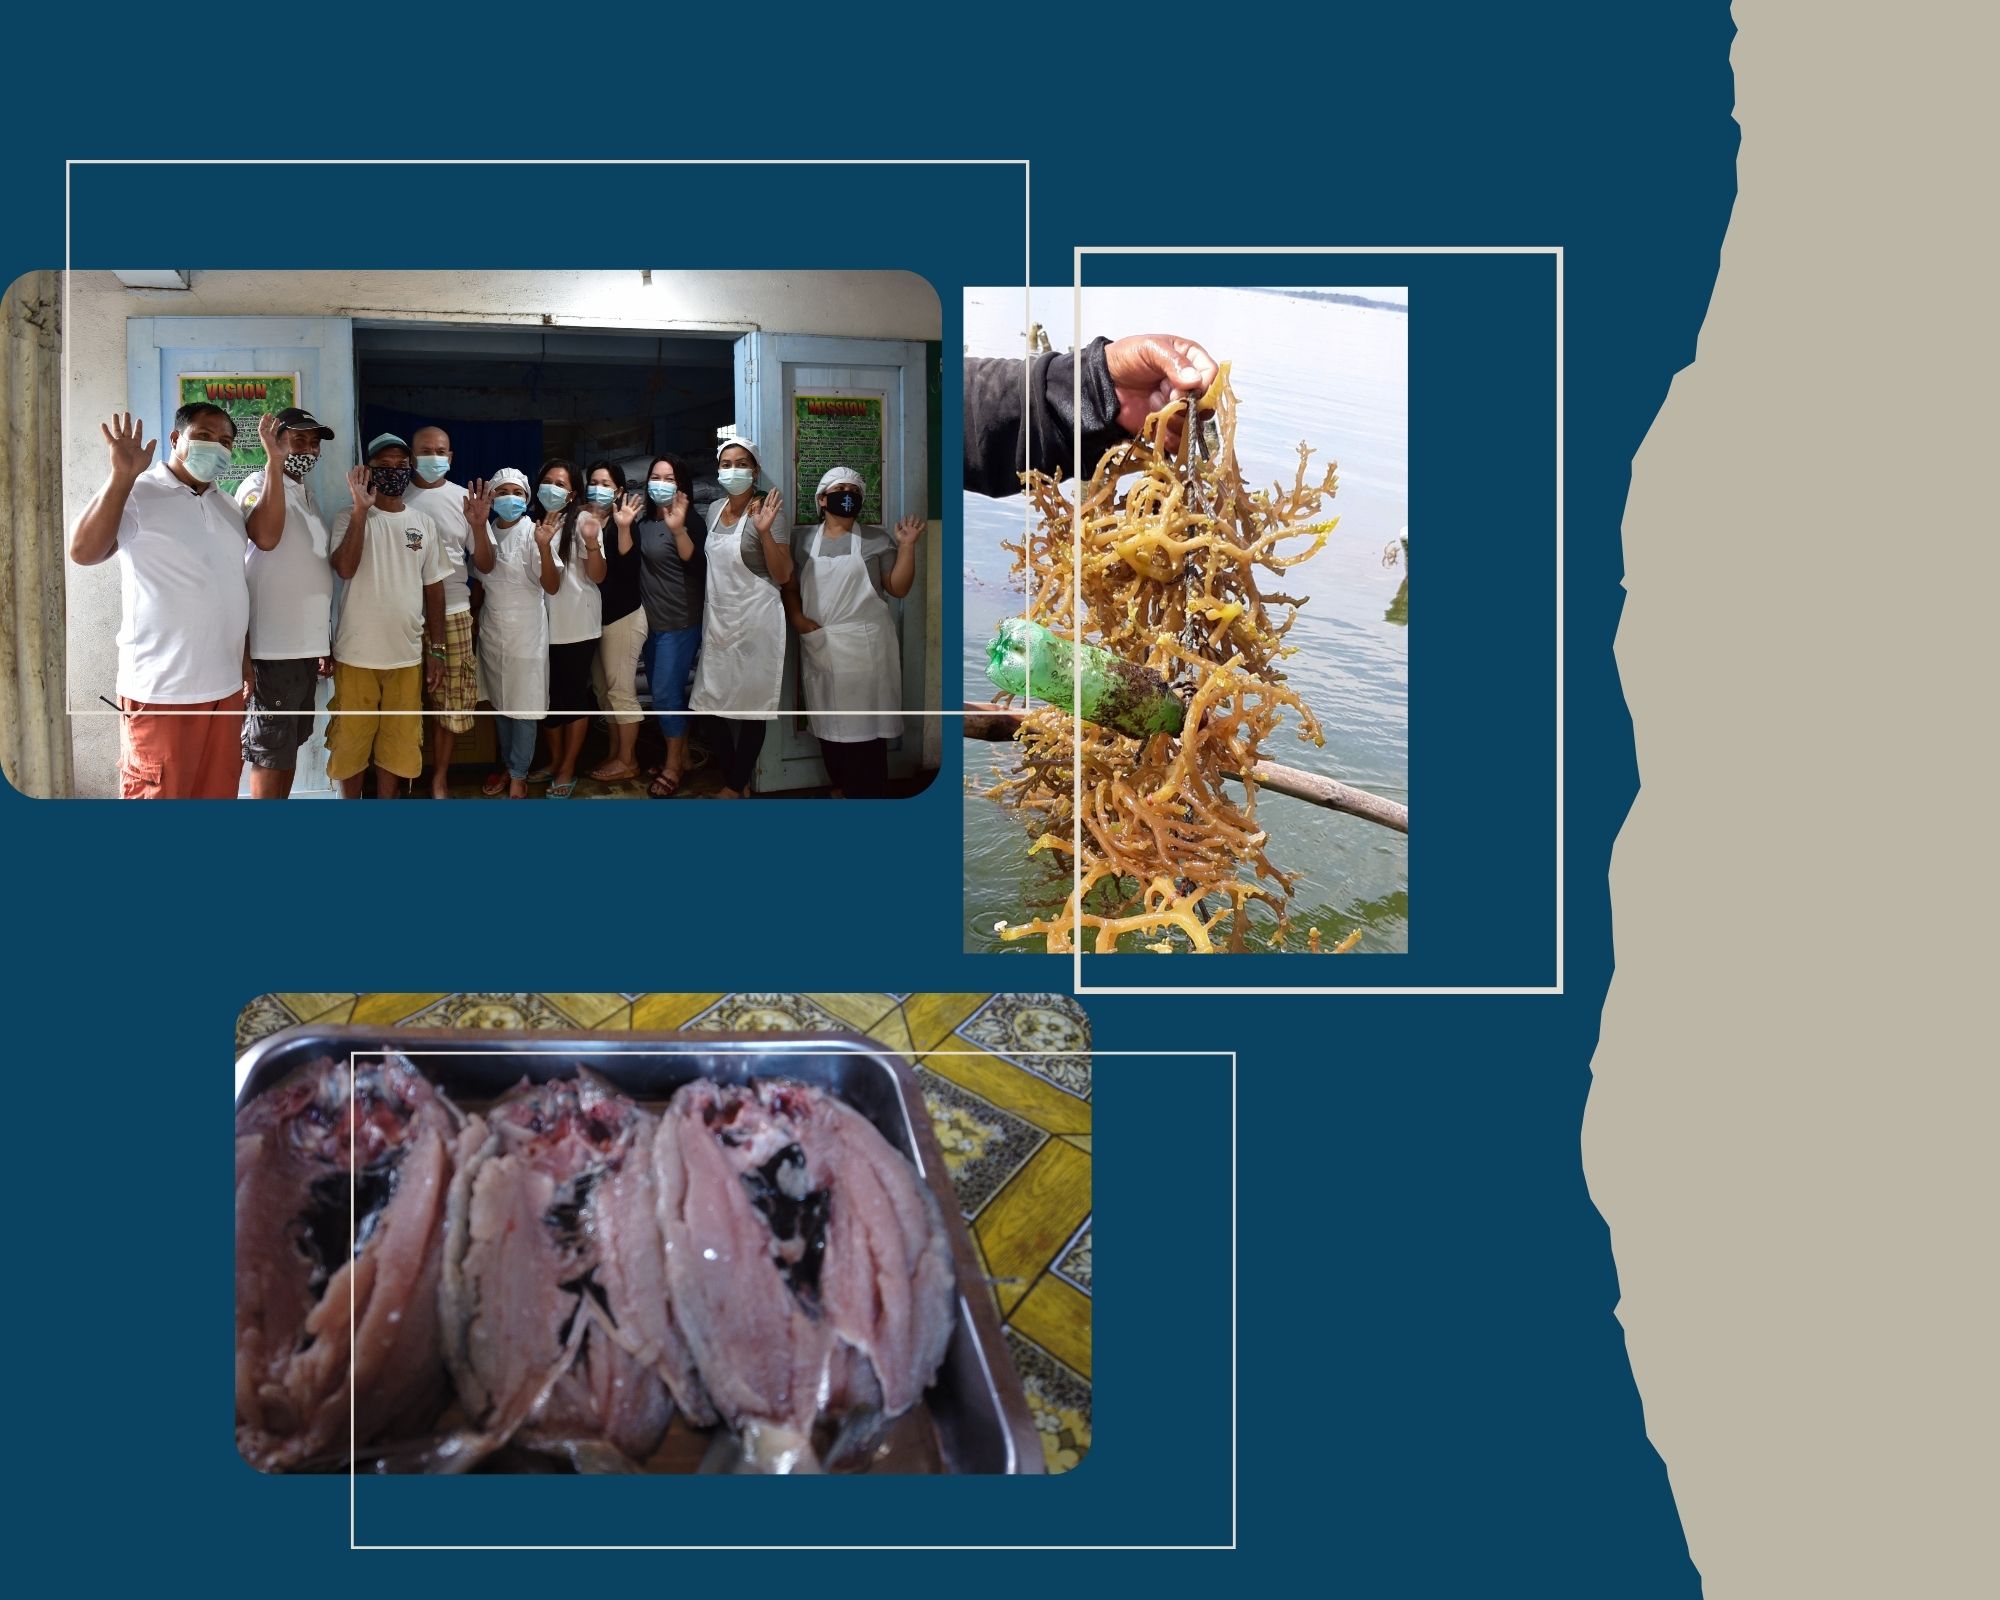 SAMMPC’s increasing seaweed and bangus projects